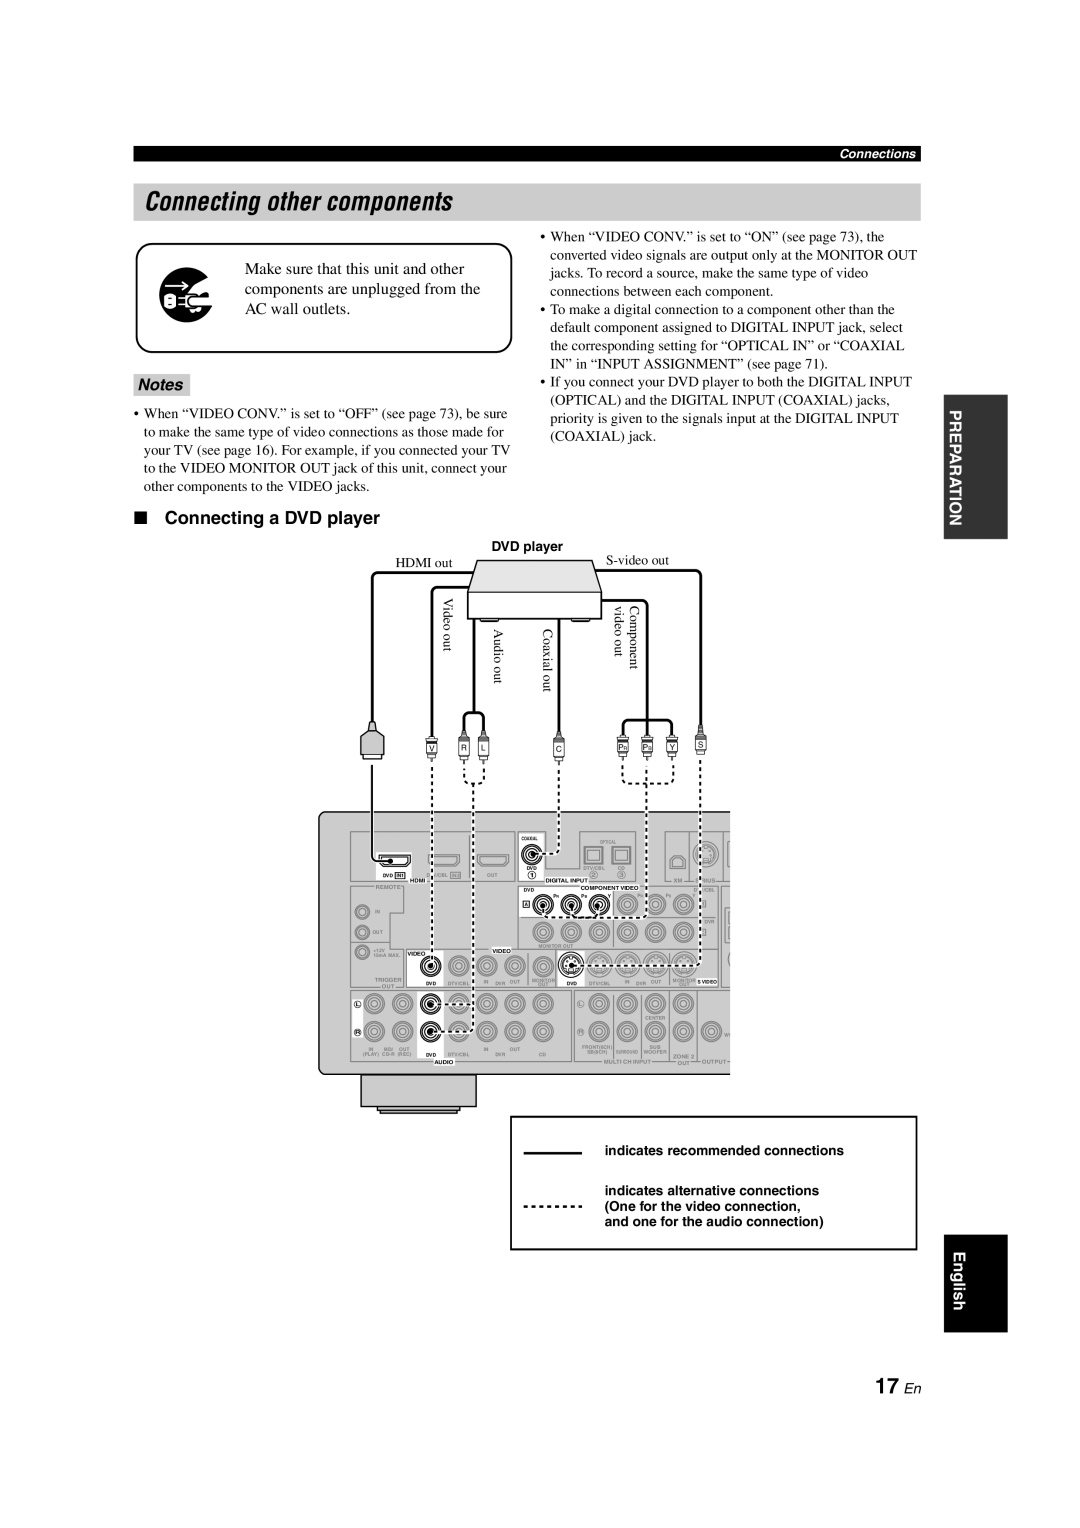 Yamaha RX-V563 owner manual Connecting other components, 17 En, Connecting a DVD player 